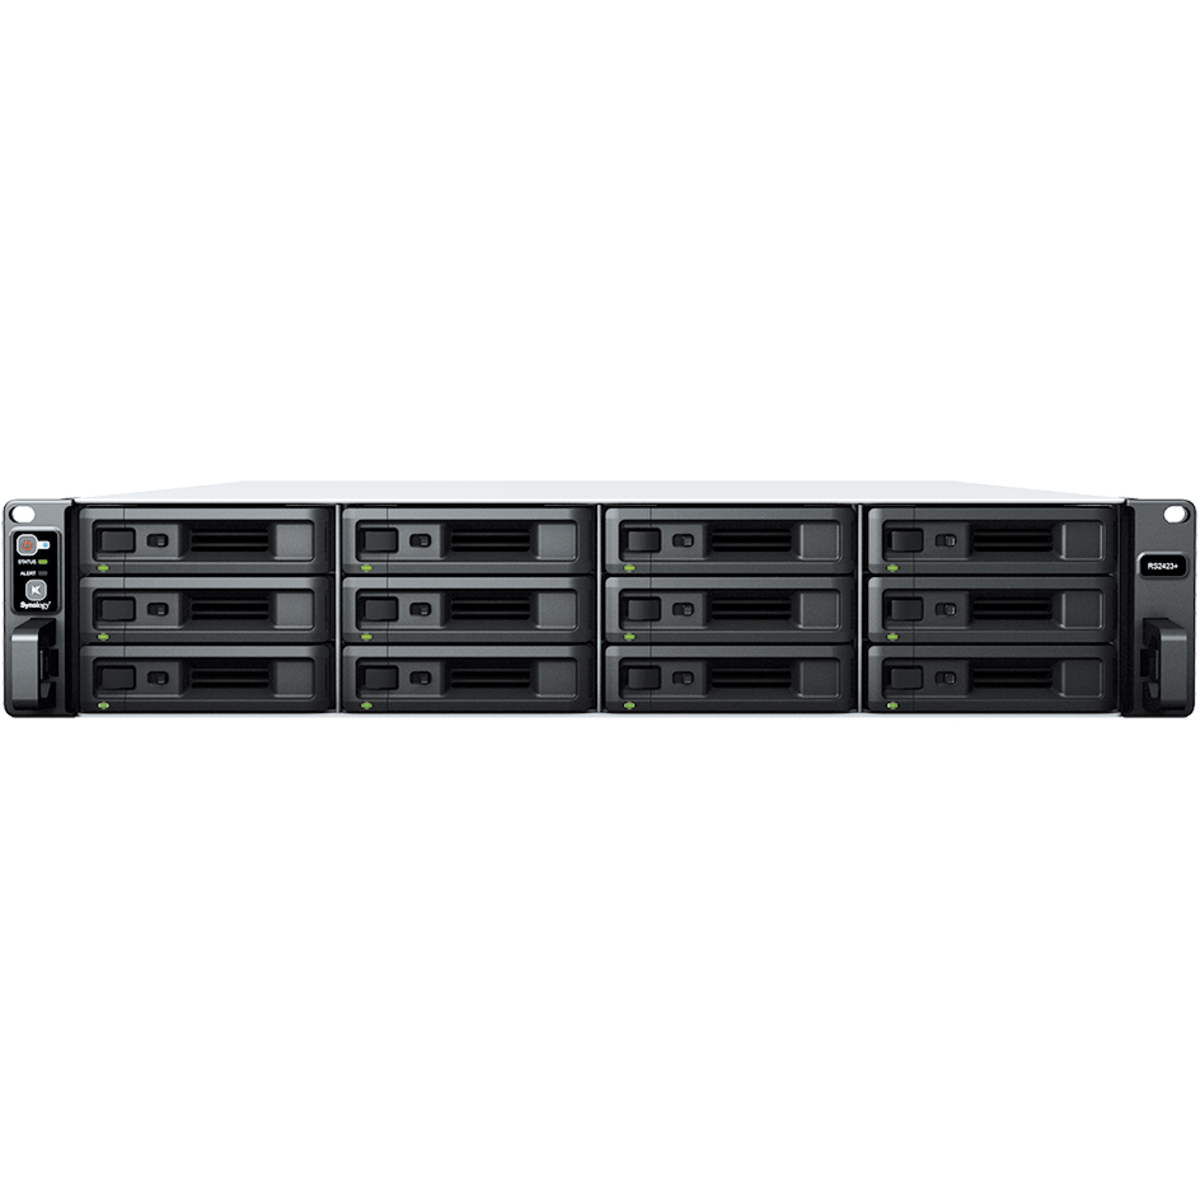 buy Synology RackStation RS2423+ 264tb RackMount NAS - Network Attached Storage Device 12x22000gb Seagate IronWolf Pro ST22000NT001 3.5 7200rpm SATA 6Gb/s HDD NAS Class Drives Installed - Burn-In Tested - ON SALE - nas headquarters buy network attached storage server device das new raid-5 free shipping simply usa christmas holiday black friday cyber monday week sale happening now! RackStation RS2423+